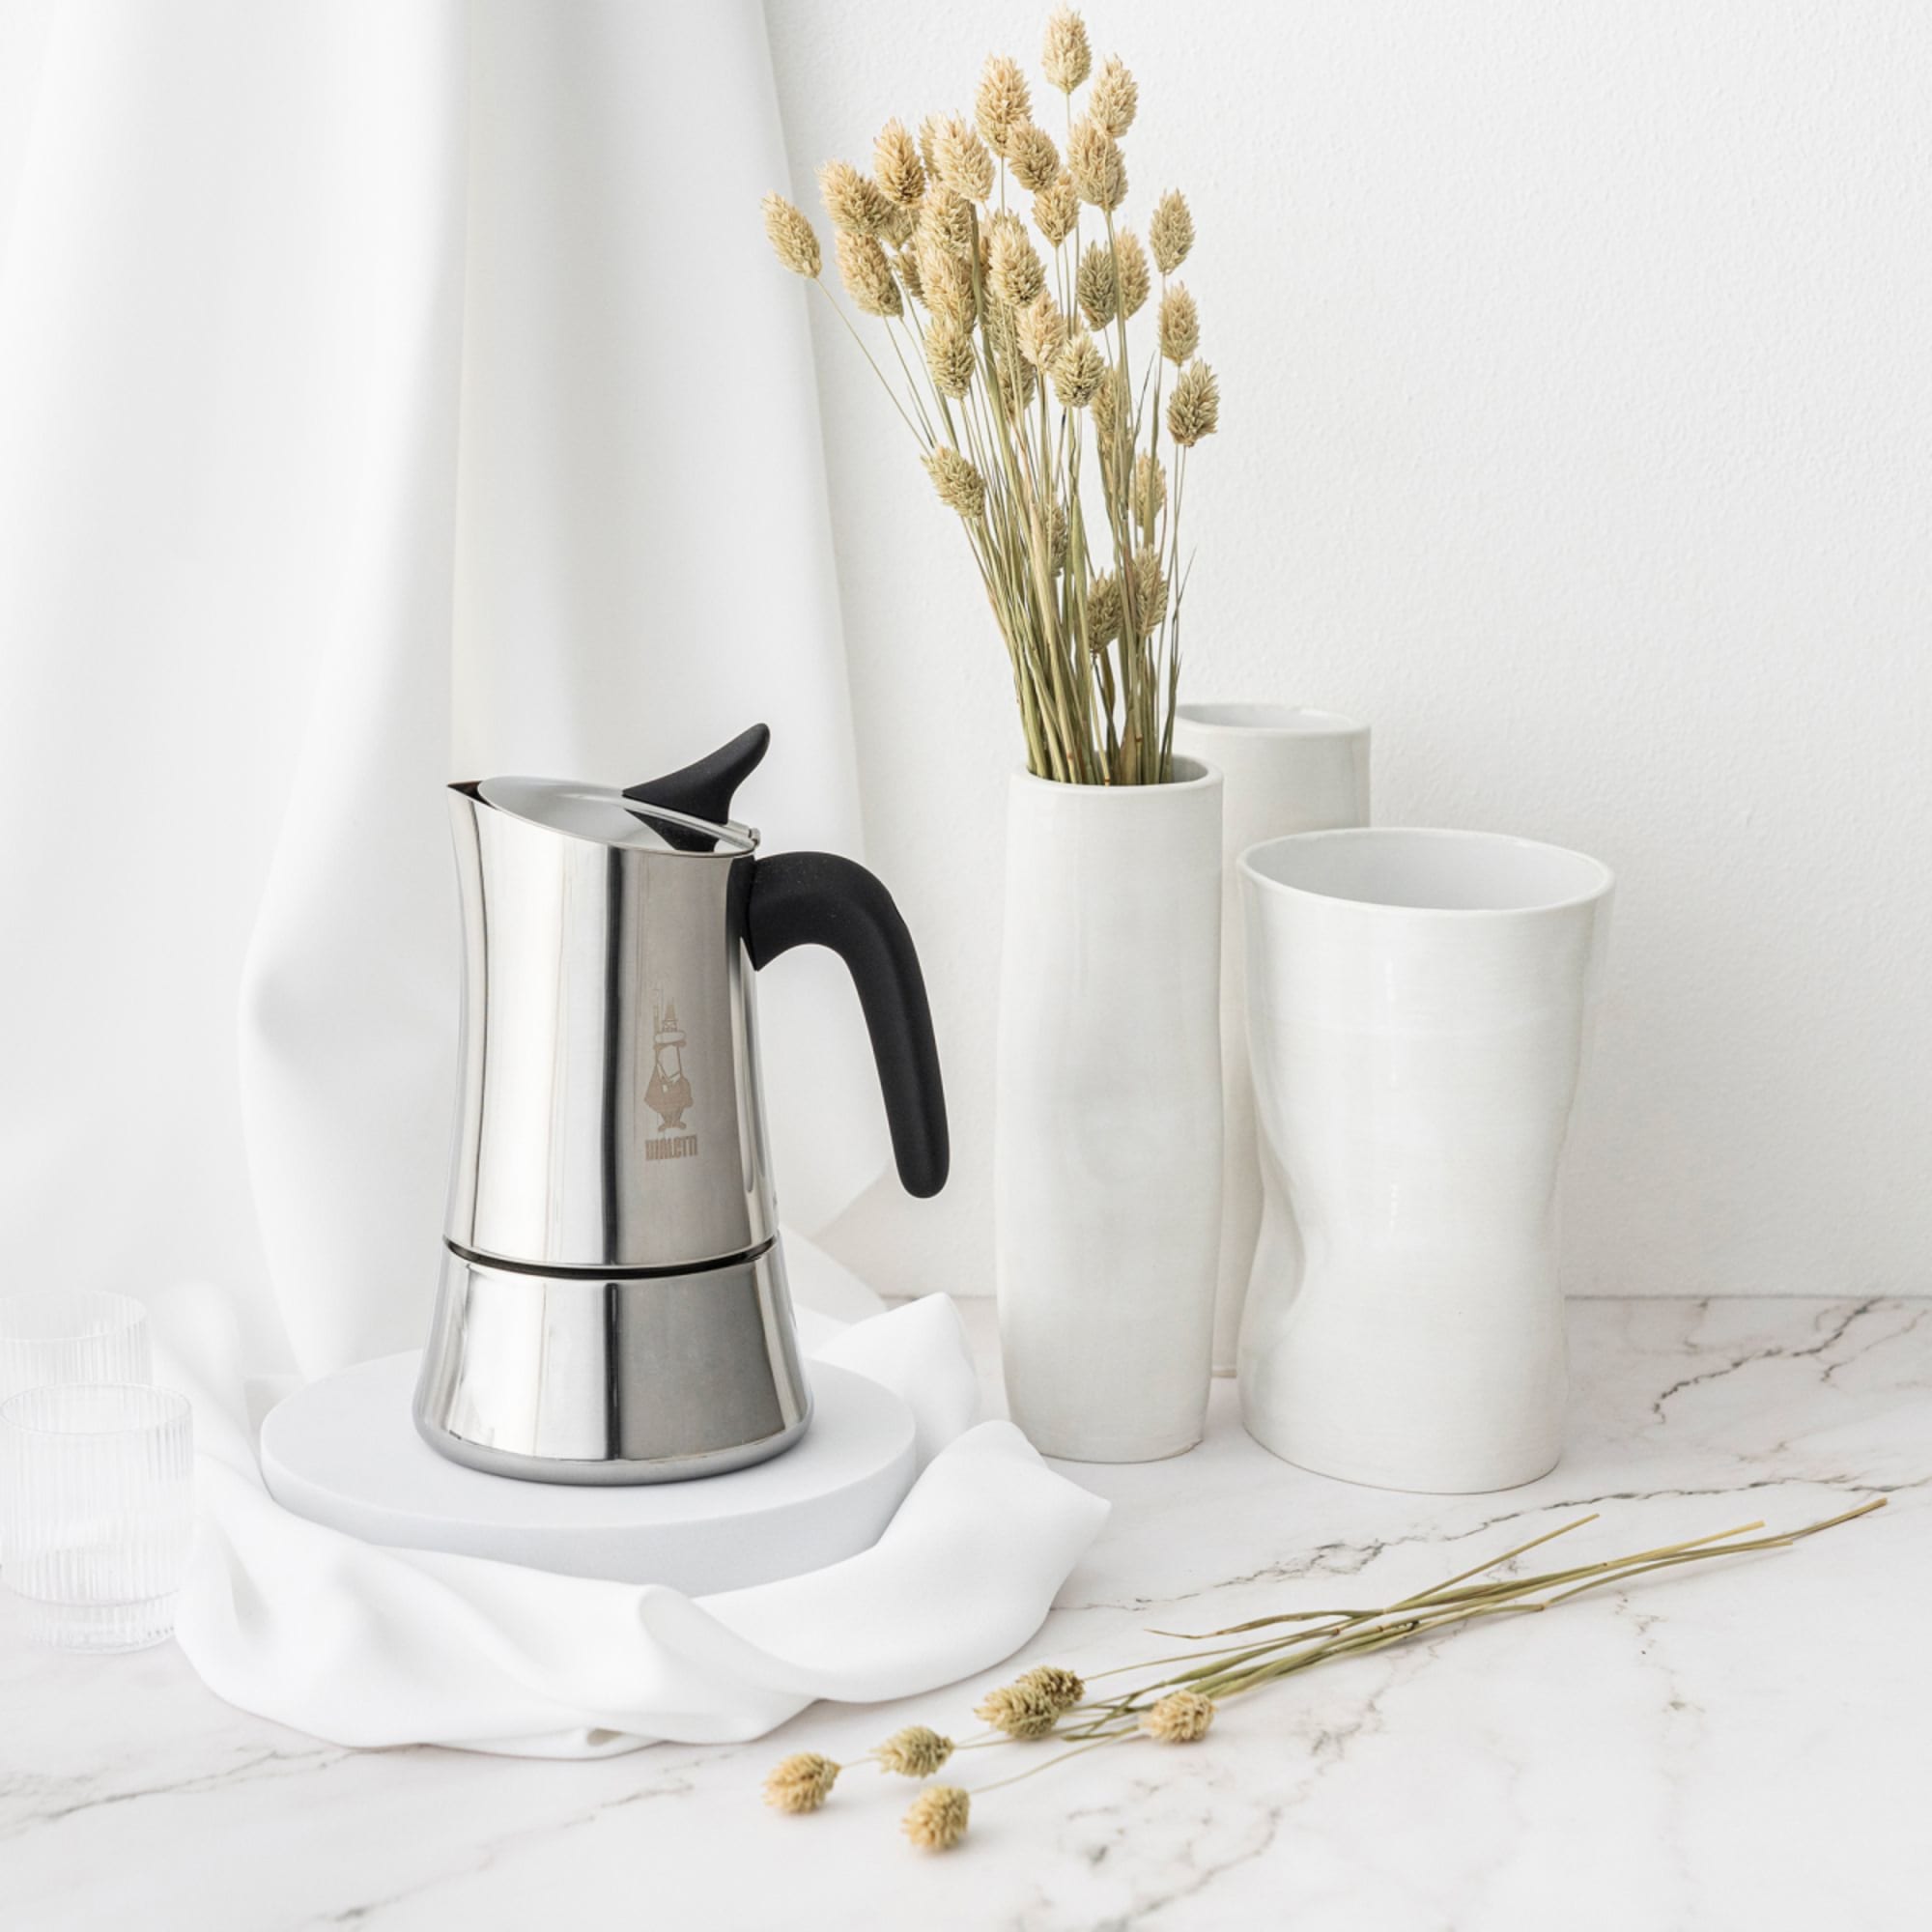 https://res.cloudinary.com/kitchenwarehouse/image/upload/c_fill,g_face,w_1250/f_auto/t_PDP_2000x2000/Supplier%20Images%20/2000px/Bialetti-Moon-Exclusive-Stainless-Steel-Induction-Espresso-Maker-6-Cup-Silver_2_2000px.jpg?imagetype=pdp_full